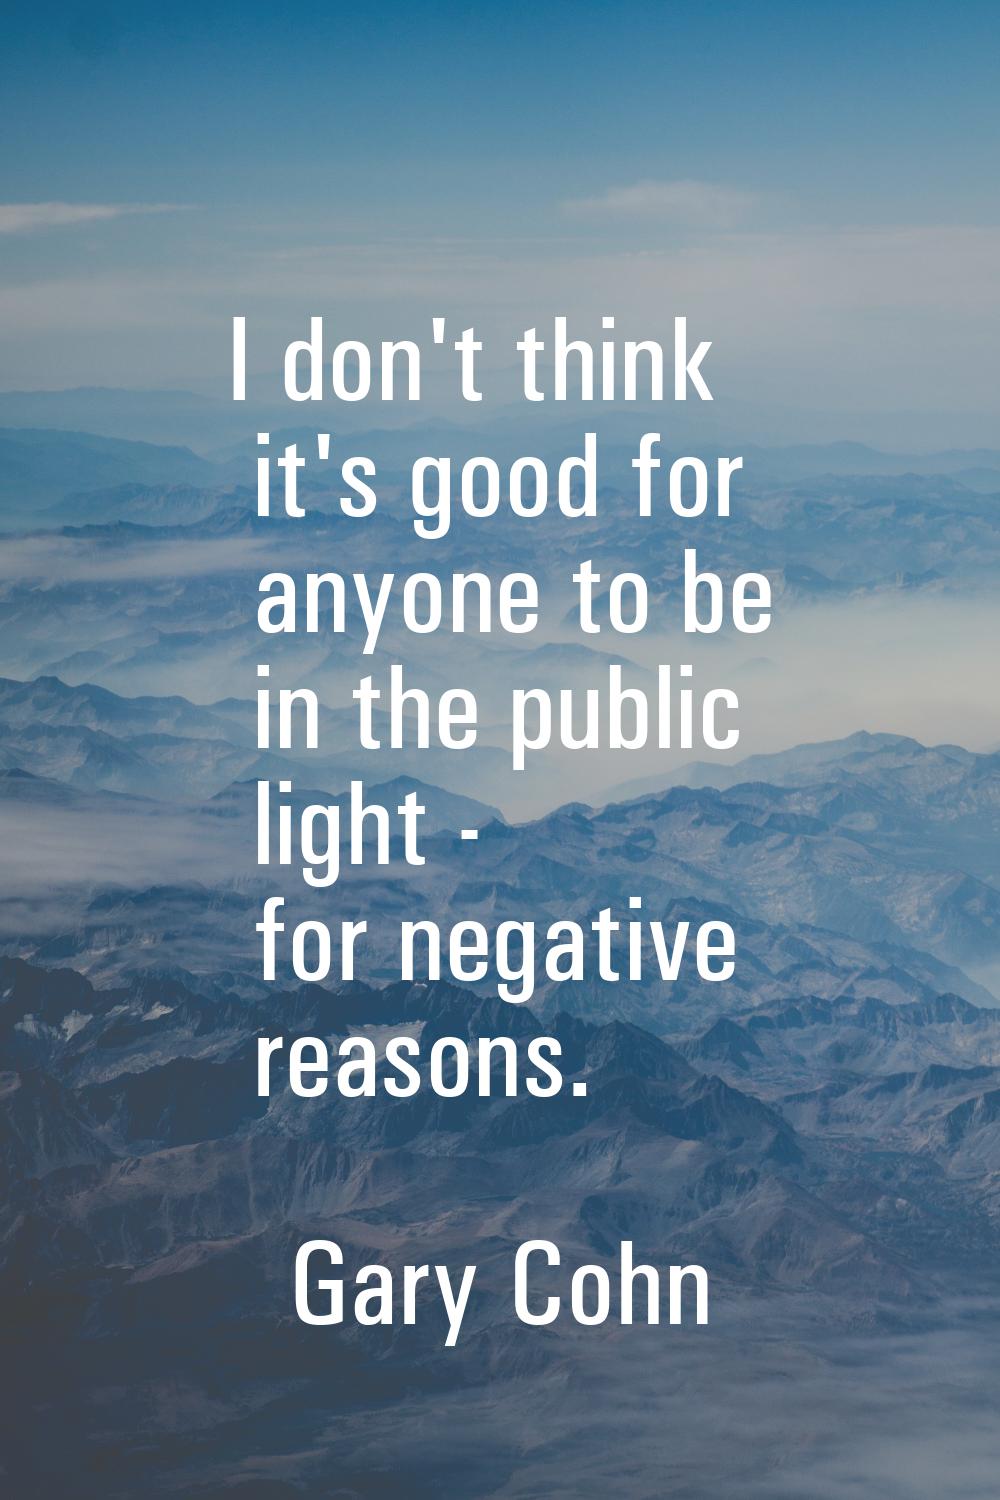 I don't think it's good for anyone to be in the public light - for negative reasons.